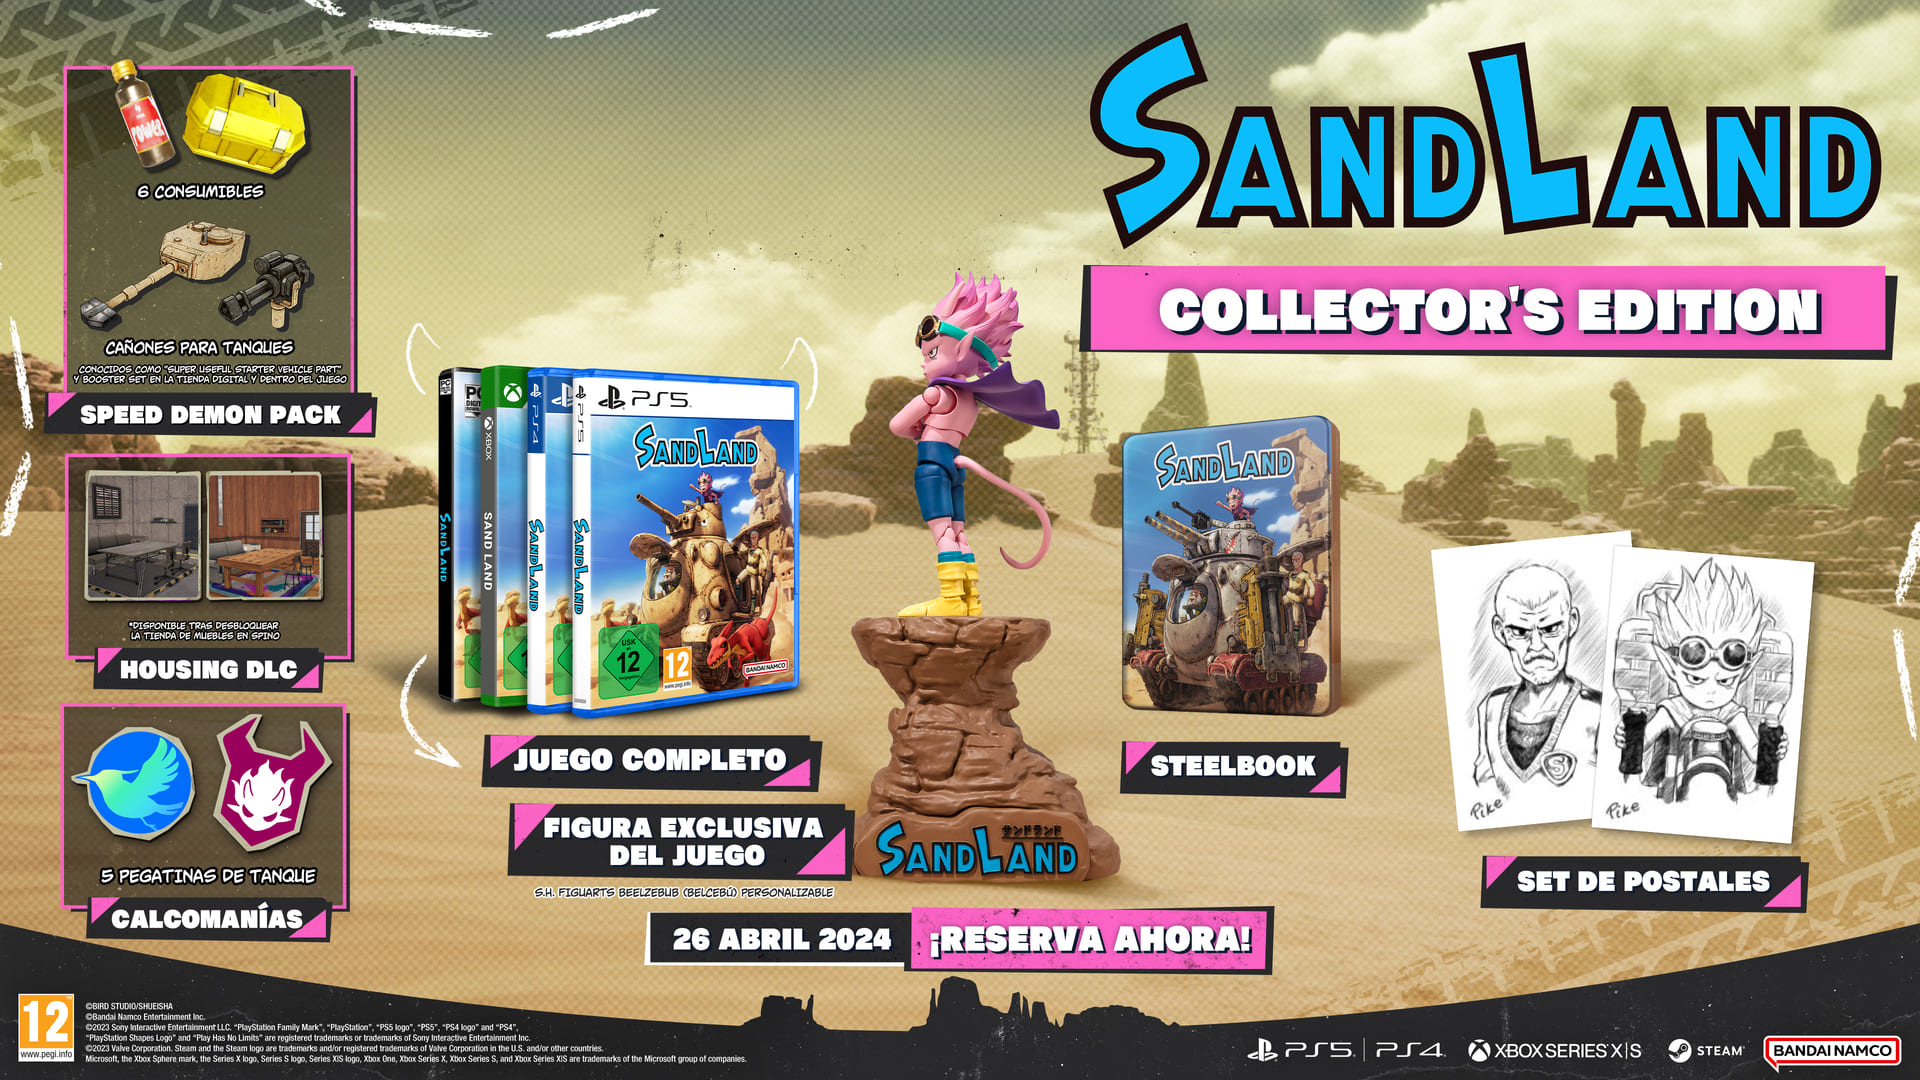 SAND LAND - Collector's Edition